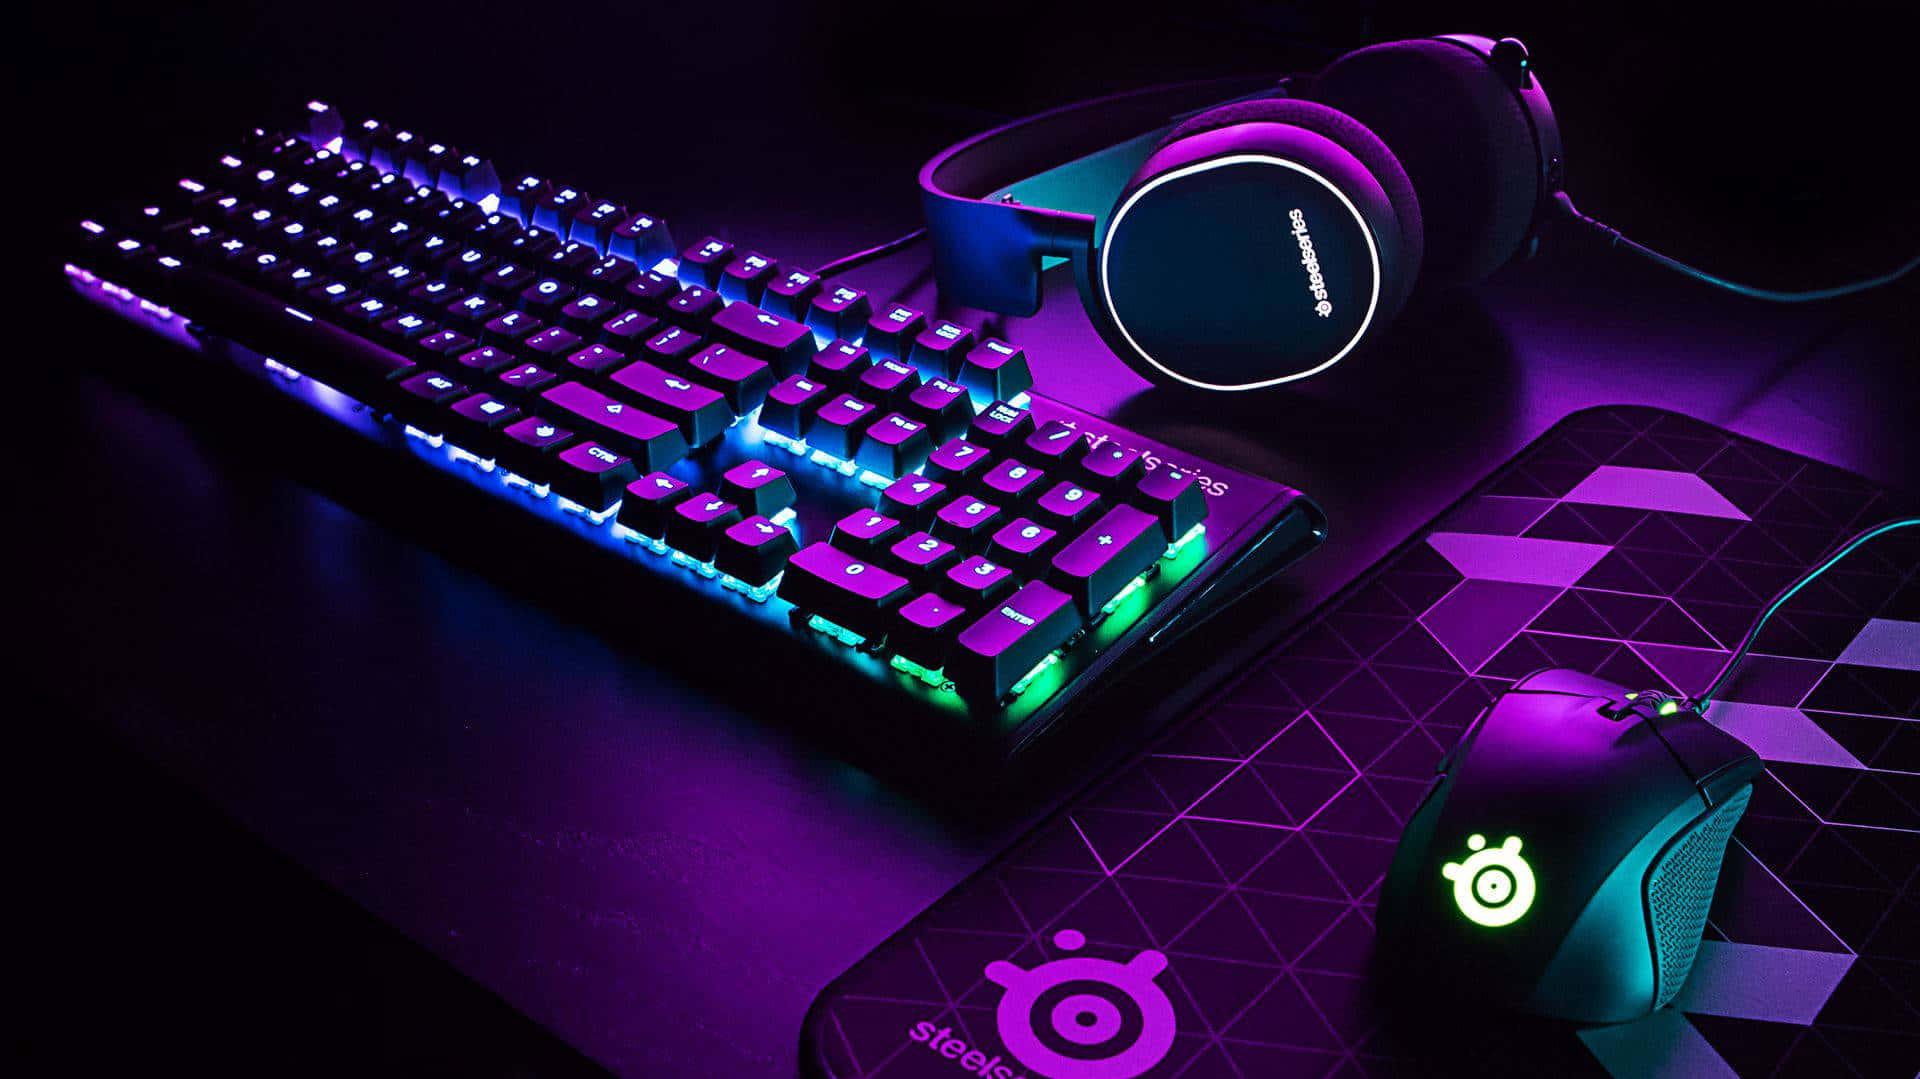 A Puter Keyboard And Mouse With Purple Lights